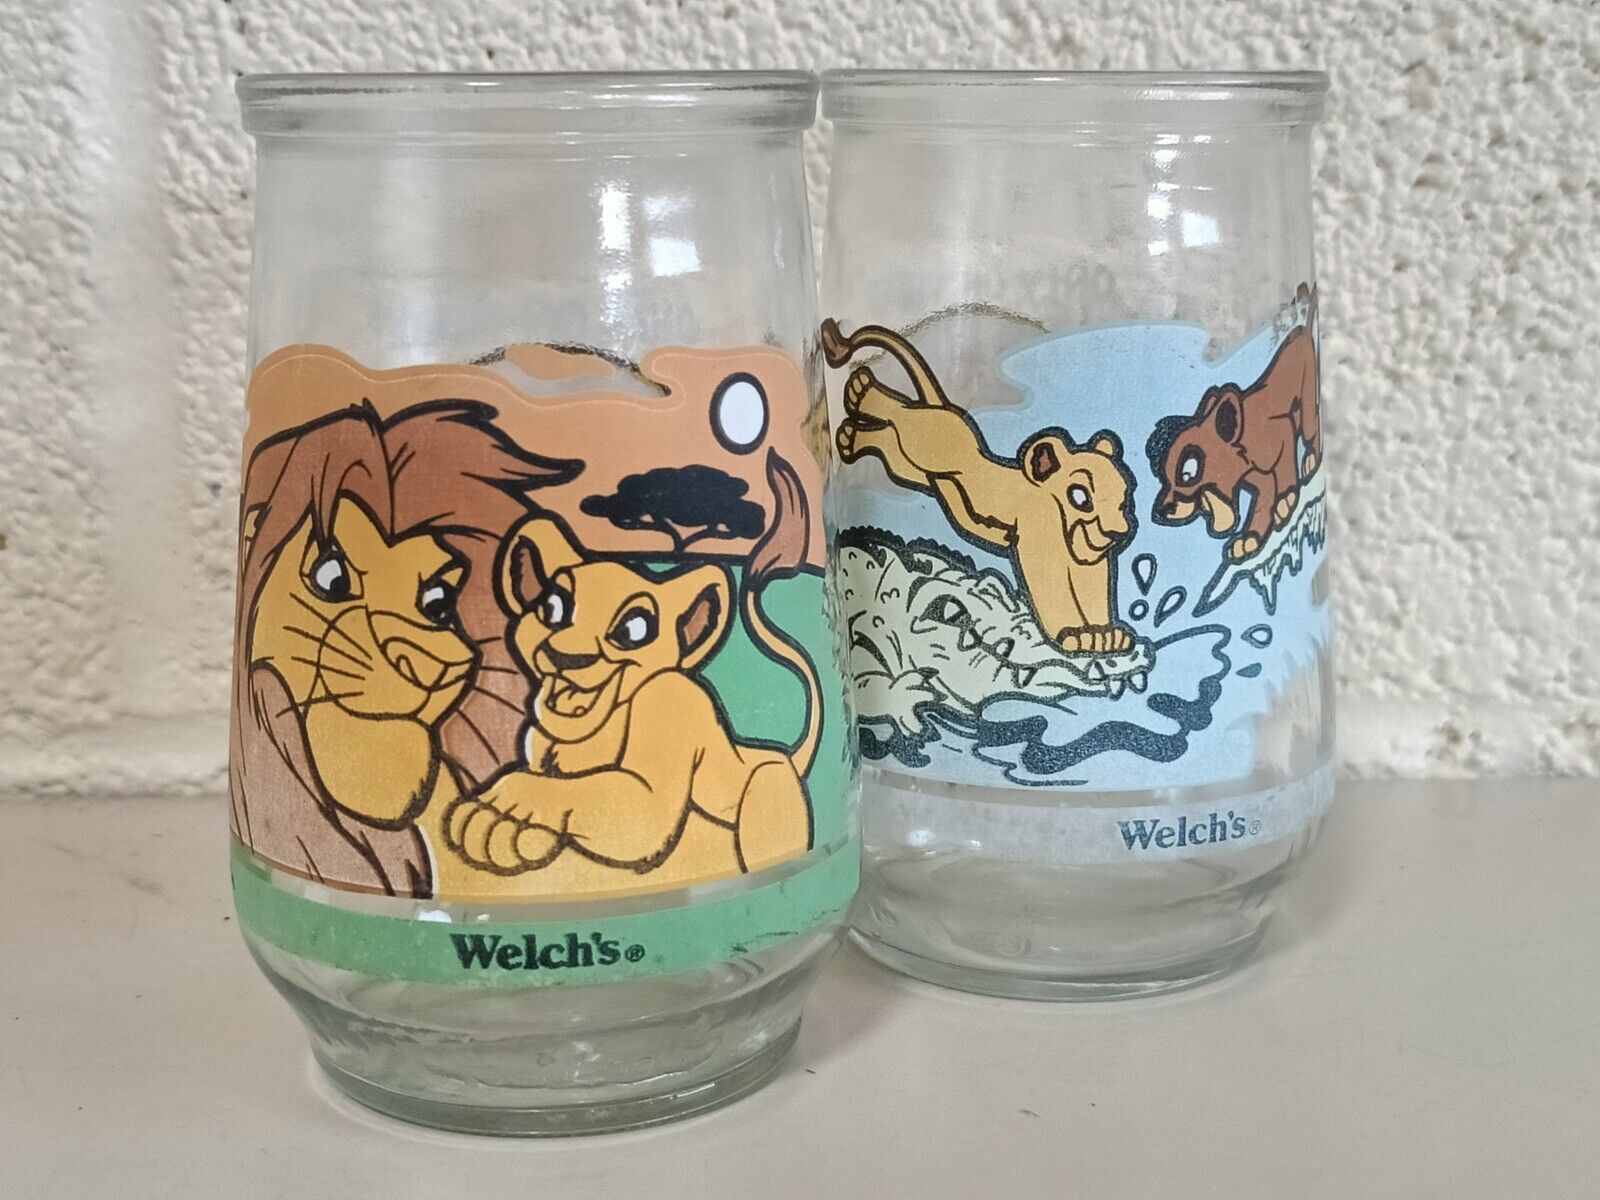 2 1995 Welch's Jelly Jar Glasses Disney's The Lion King 2 Simba's Pride #1 # 5